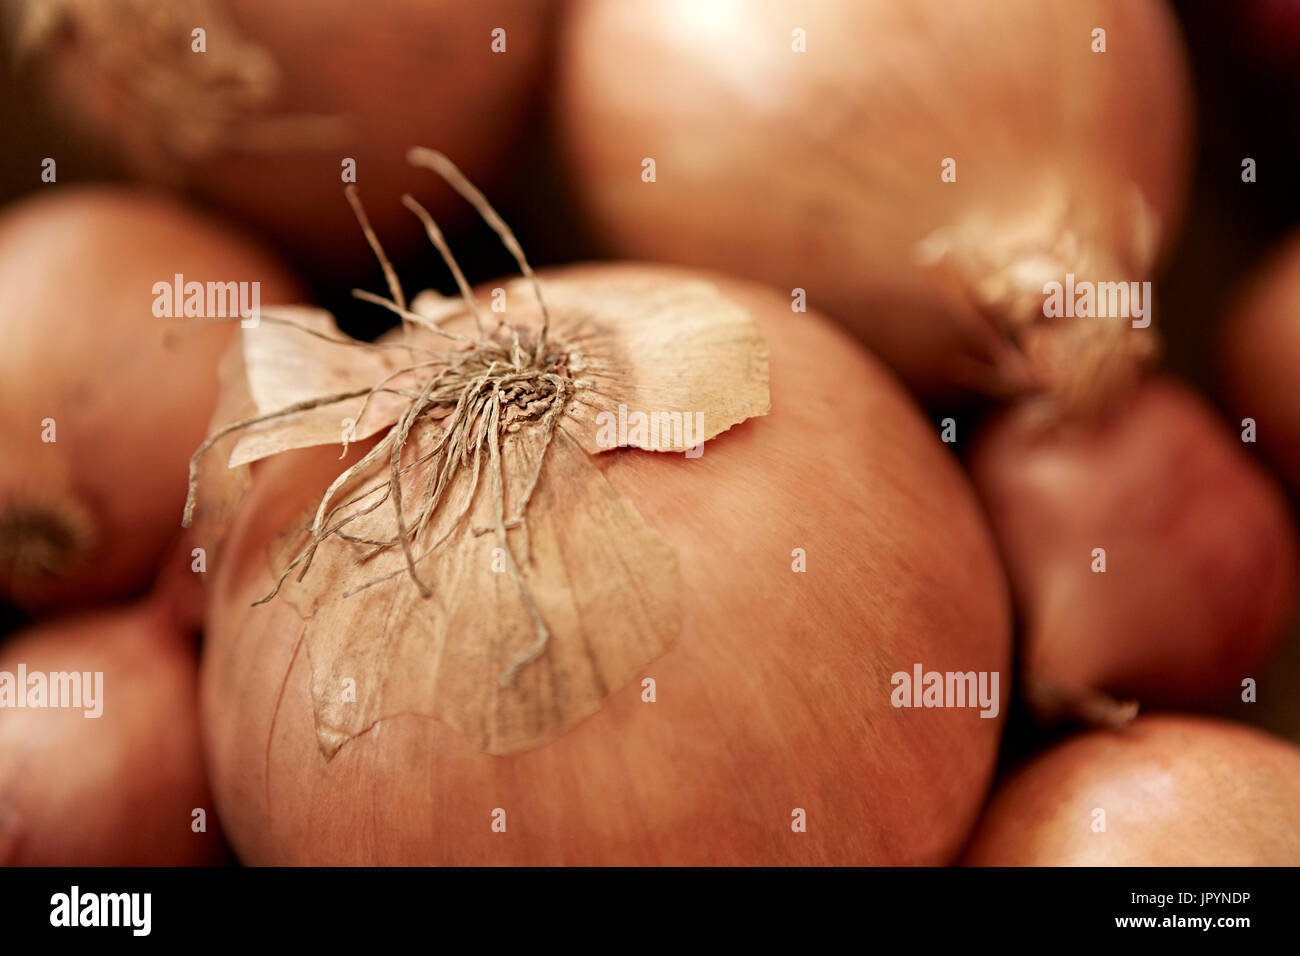 Still life close up full frame fresh, organic, healthy, rustic onion with skin and roots Stock Photo